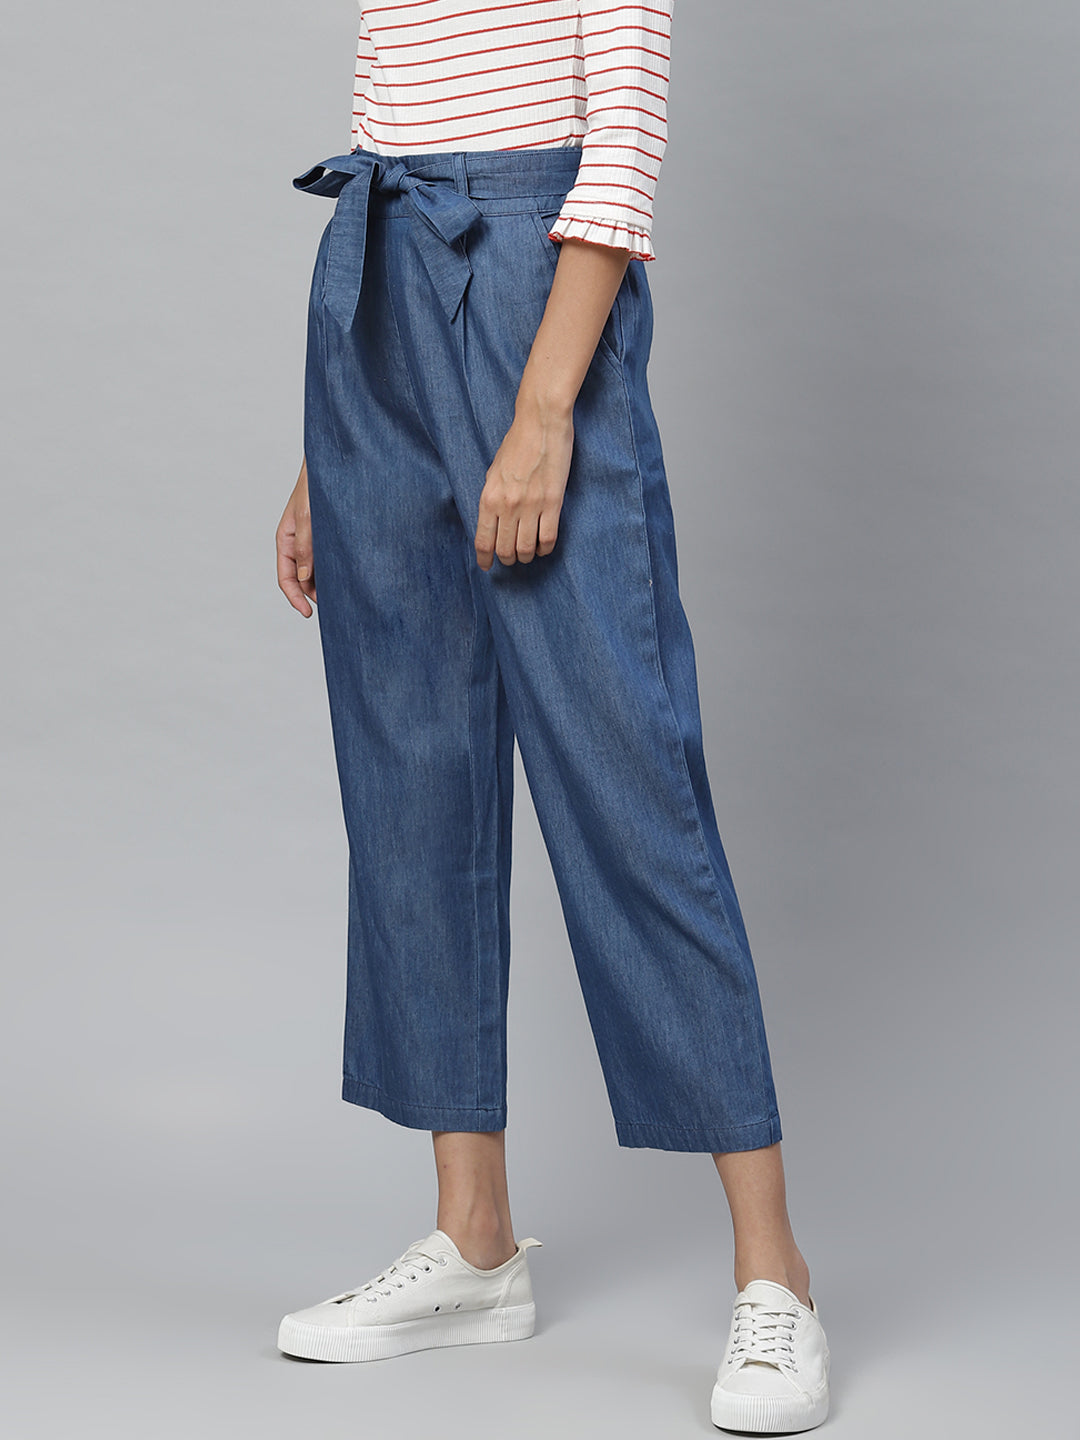  Denim Mid-Rise Culottes with Waist Tie-Up